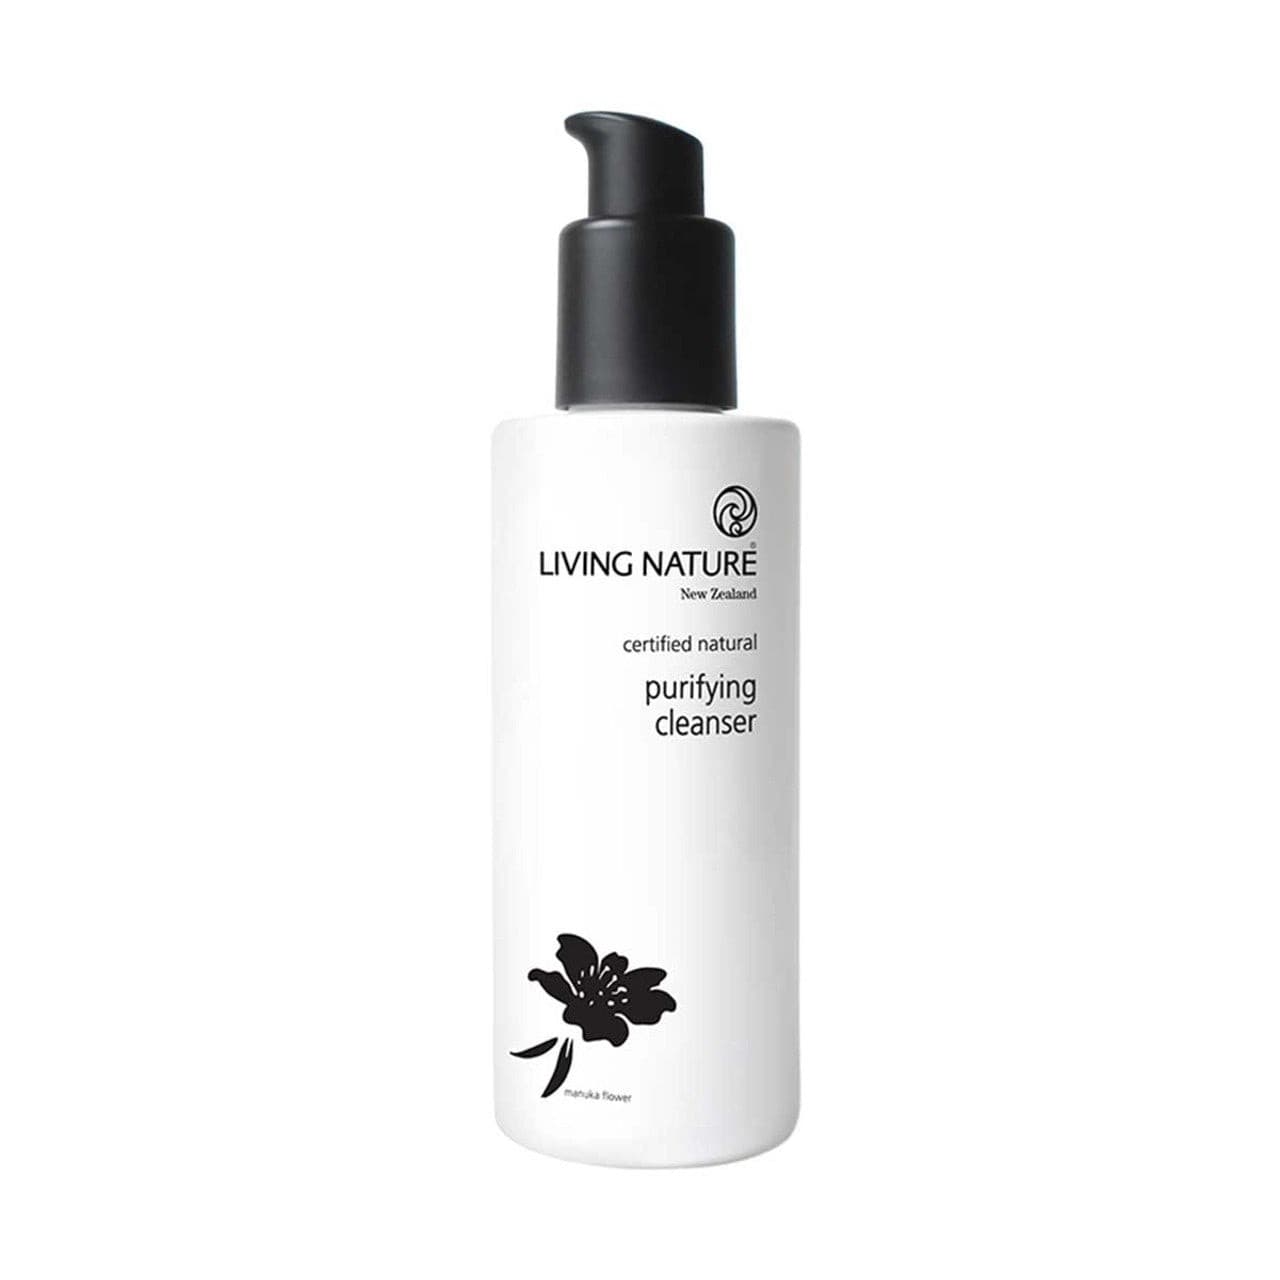 Living Nature Purifying Cleanser 120ml.